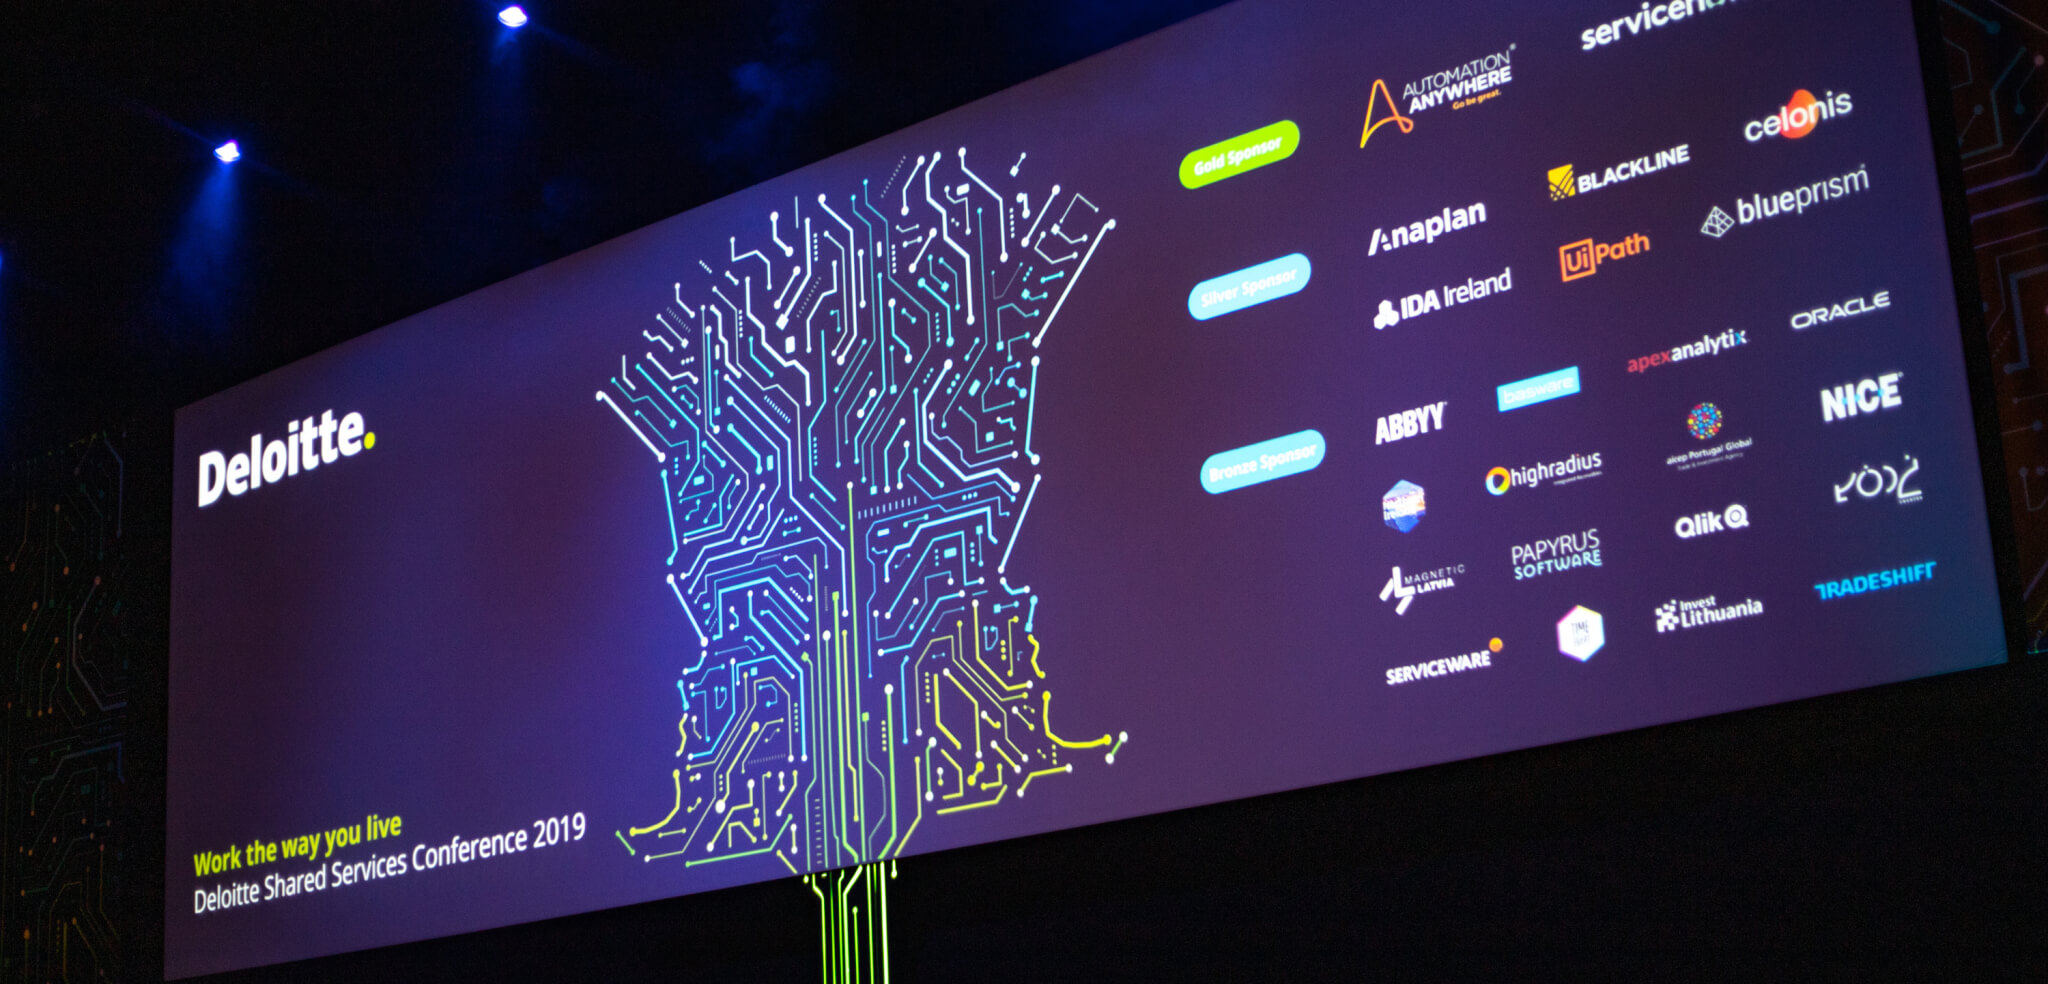 Deloitte Shared Services Conference 2019 addressed current topics and